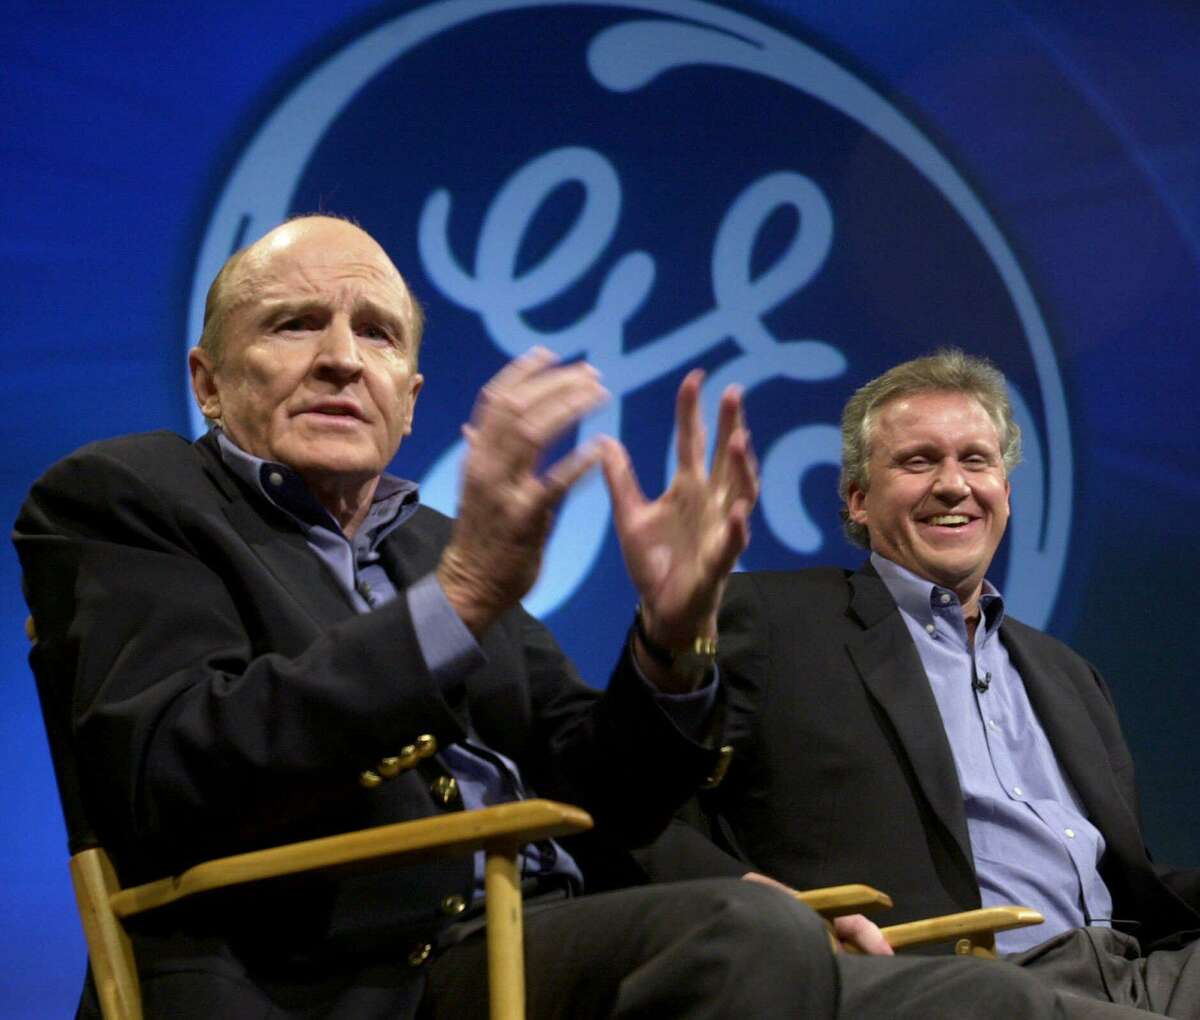 General Electric CEO Jack Welch, left, speaks during a news conference Monday, Nov. 27, 2000, in New York, as Jeff Immelt looks on.